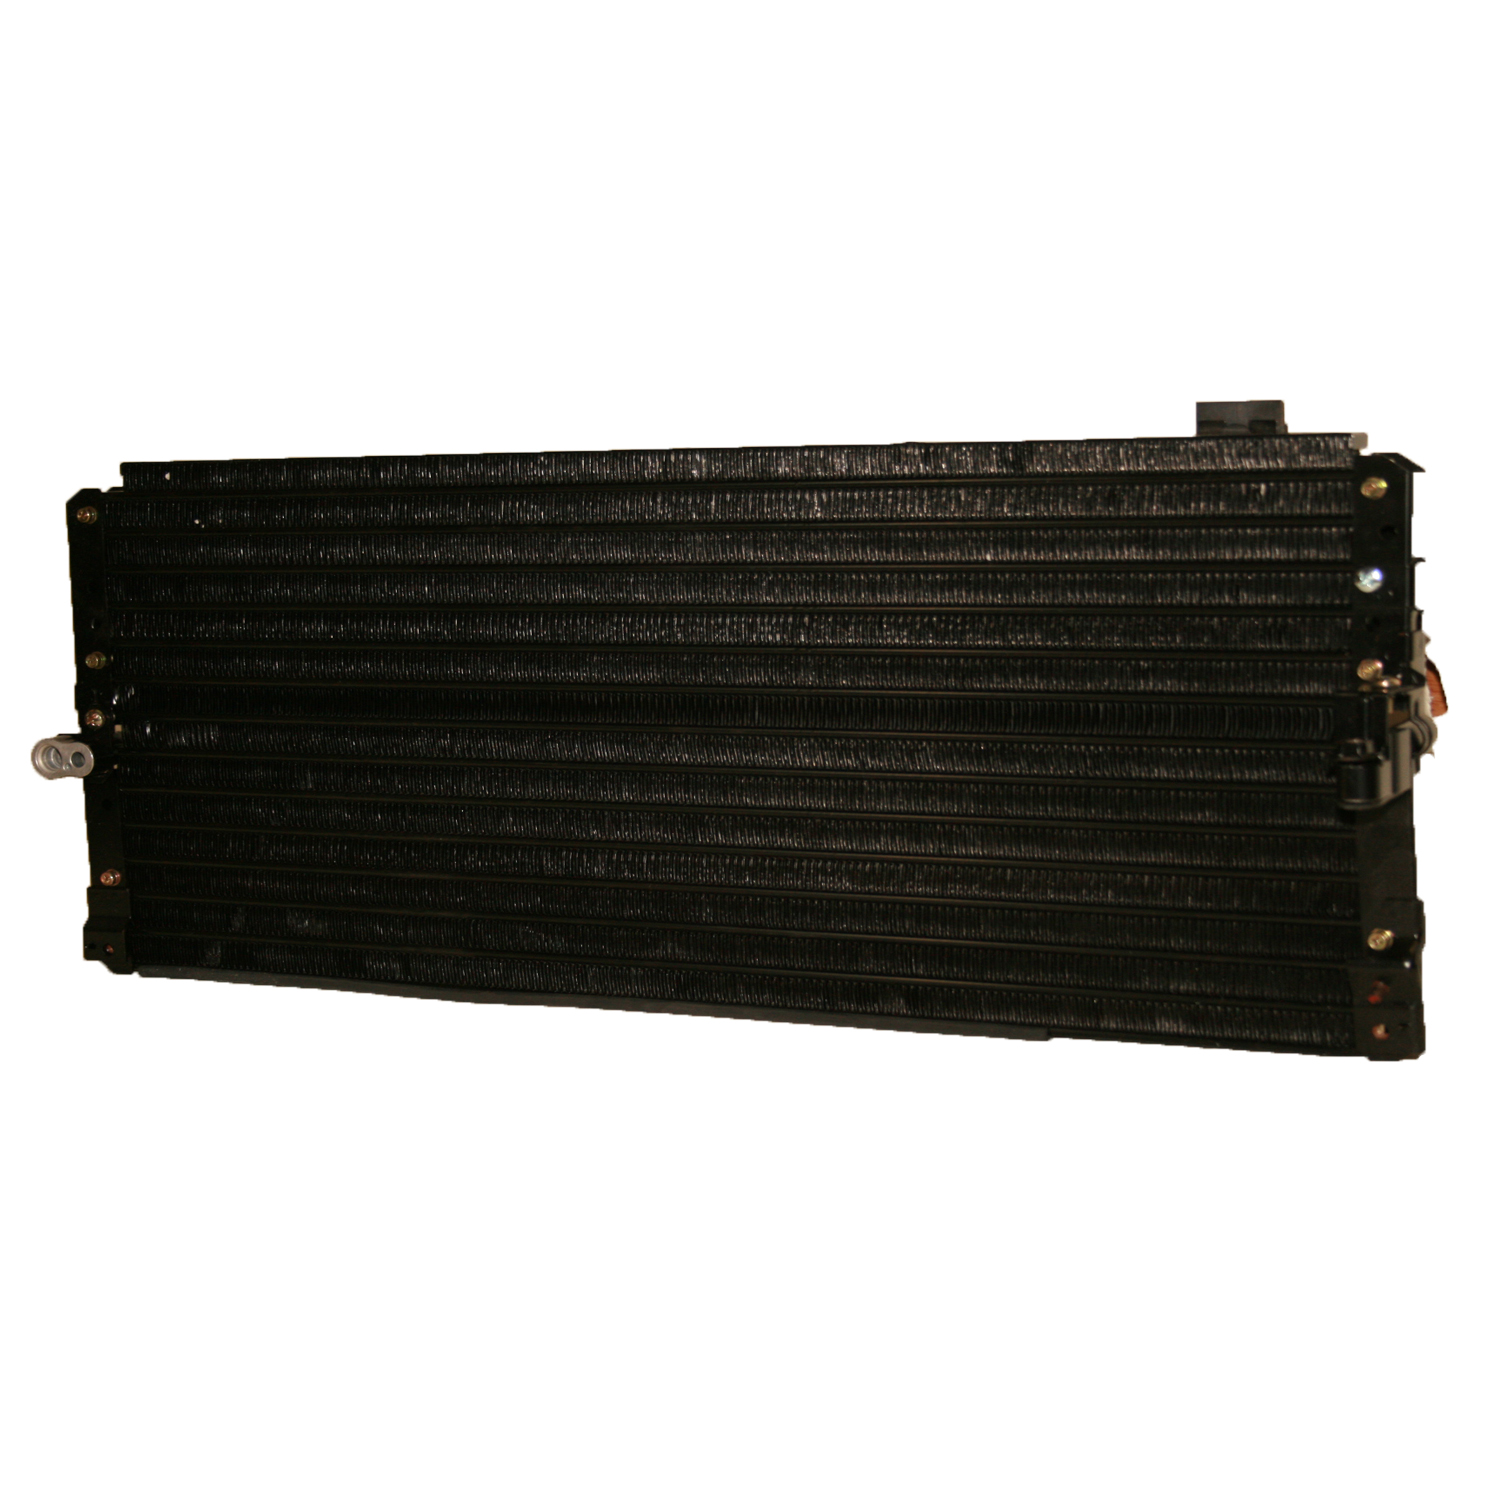 TCW Condenser 44-4216 New Product Image field_60b6a13a6e67c